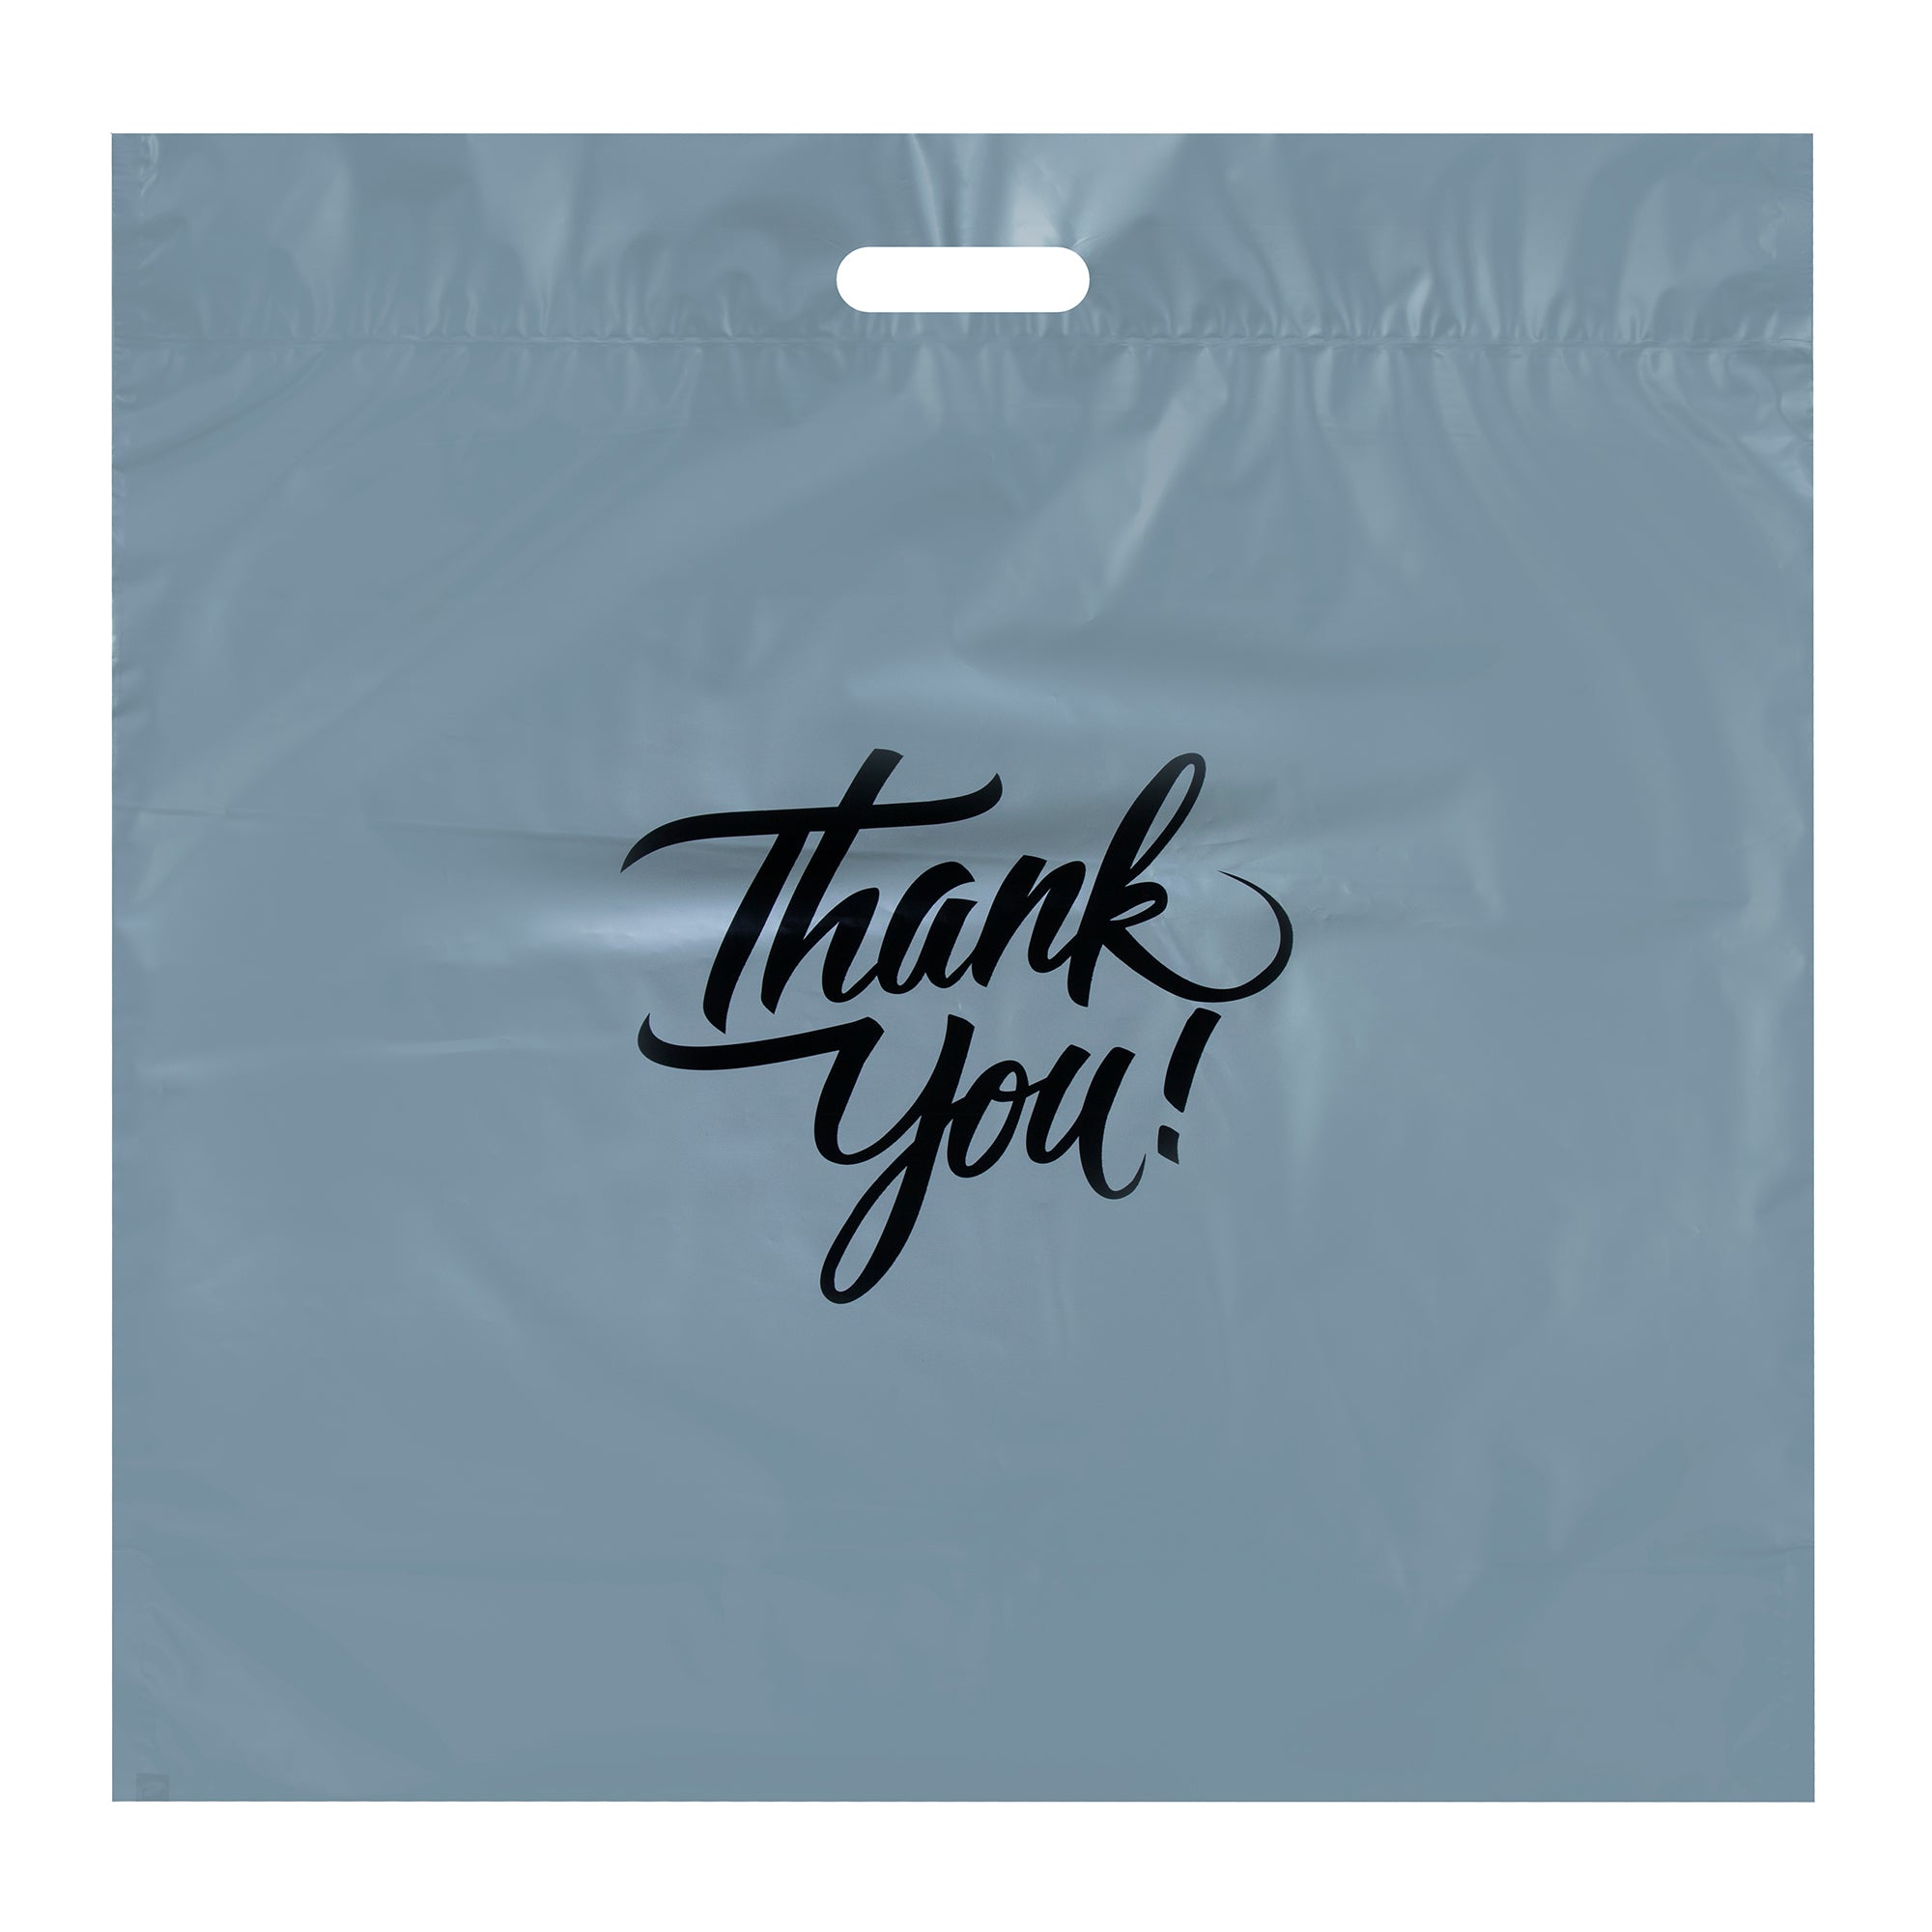 Plastic Shopping Bag w/ Loop Handles Mockup - Front View - Free Download  Images High Quality PNG, JPG